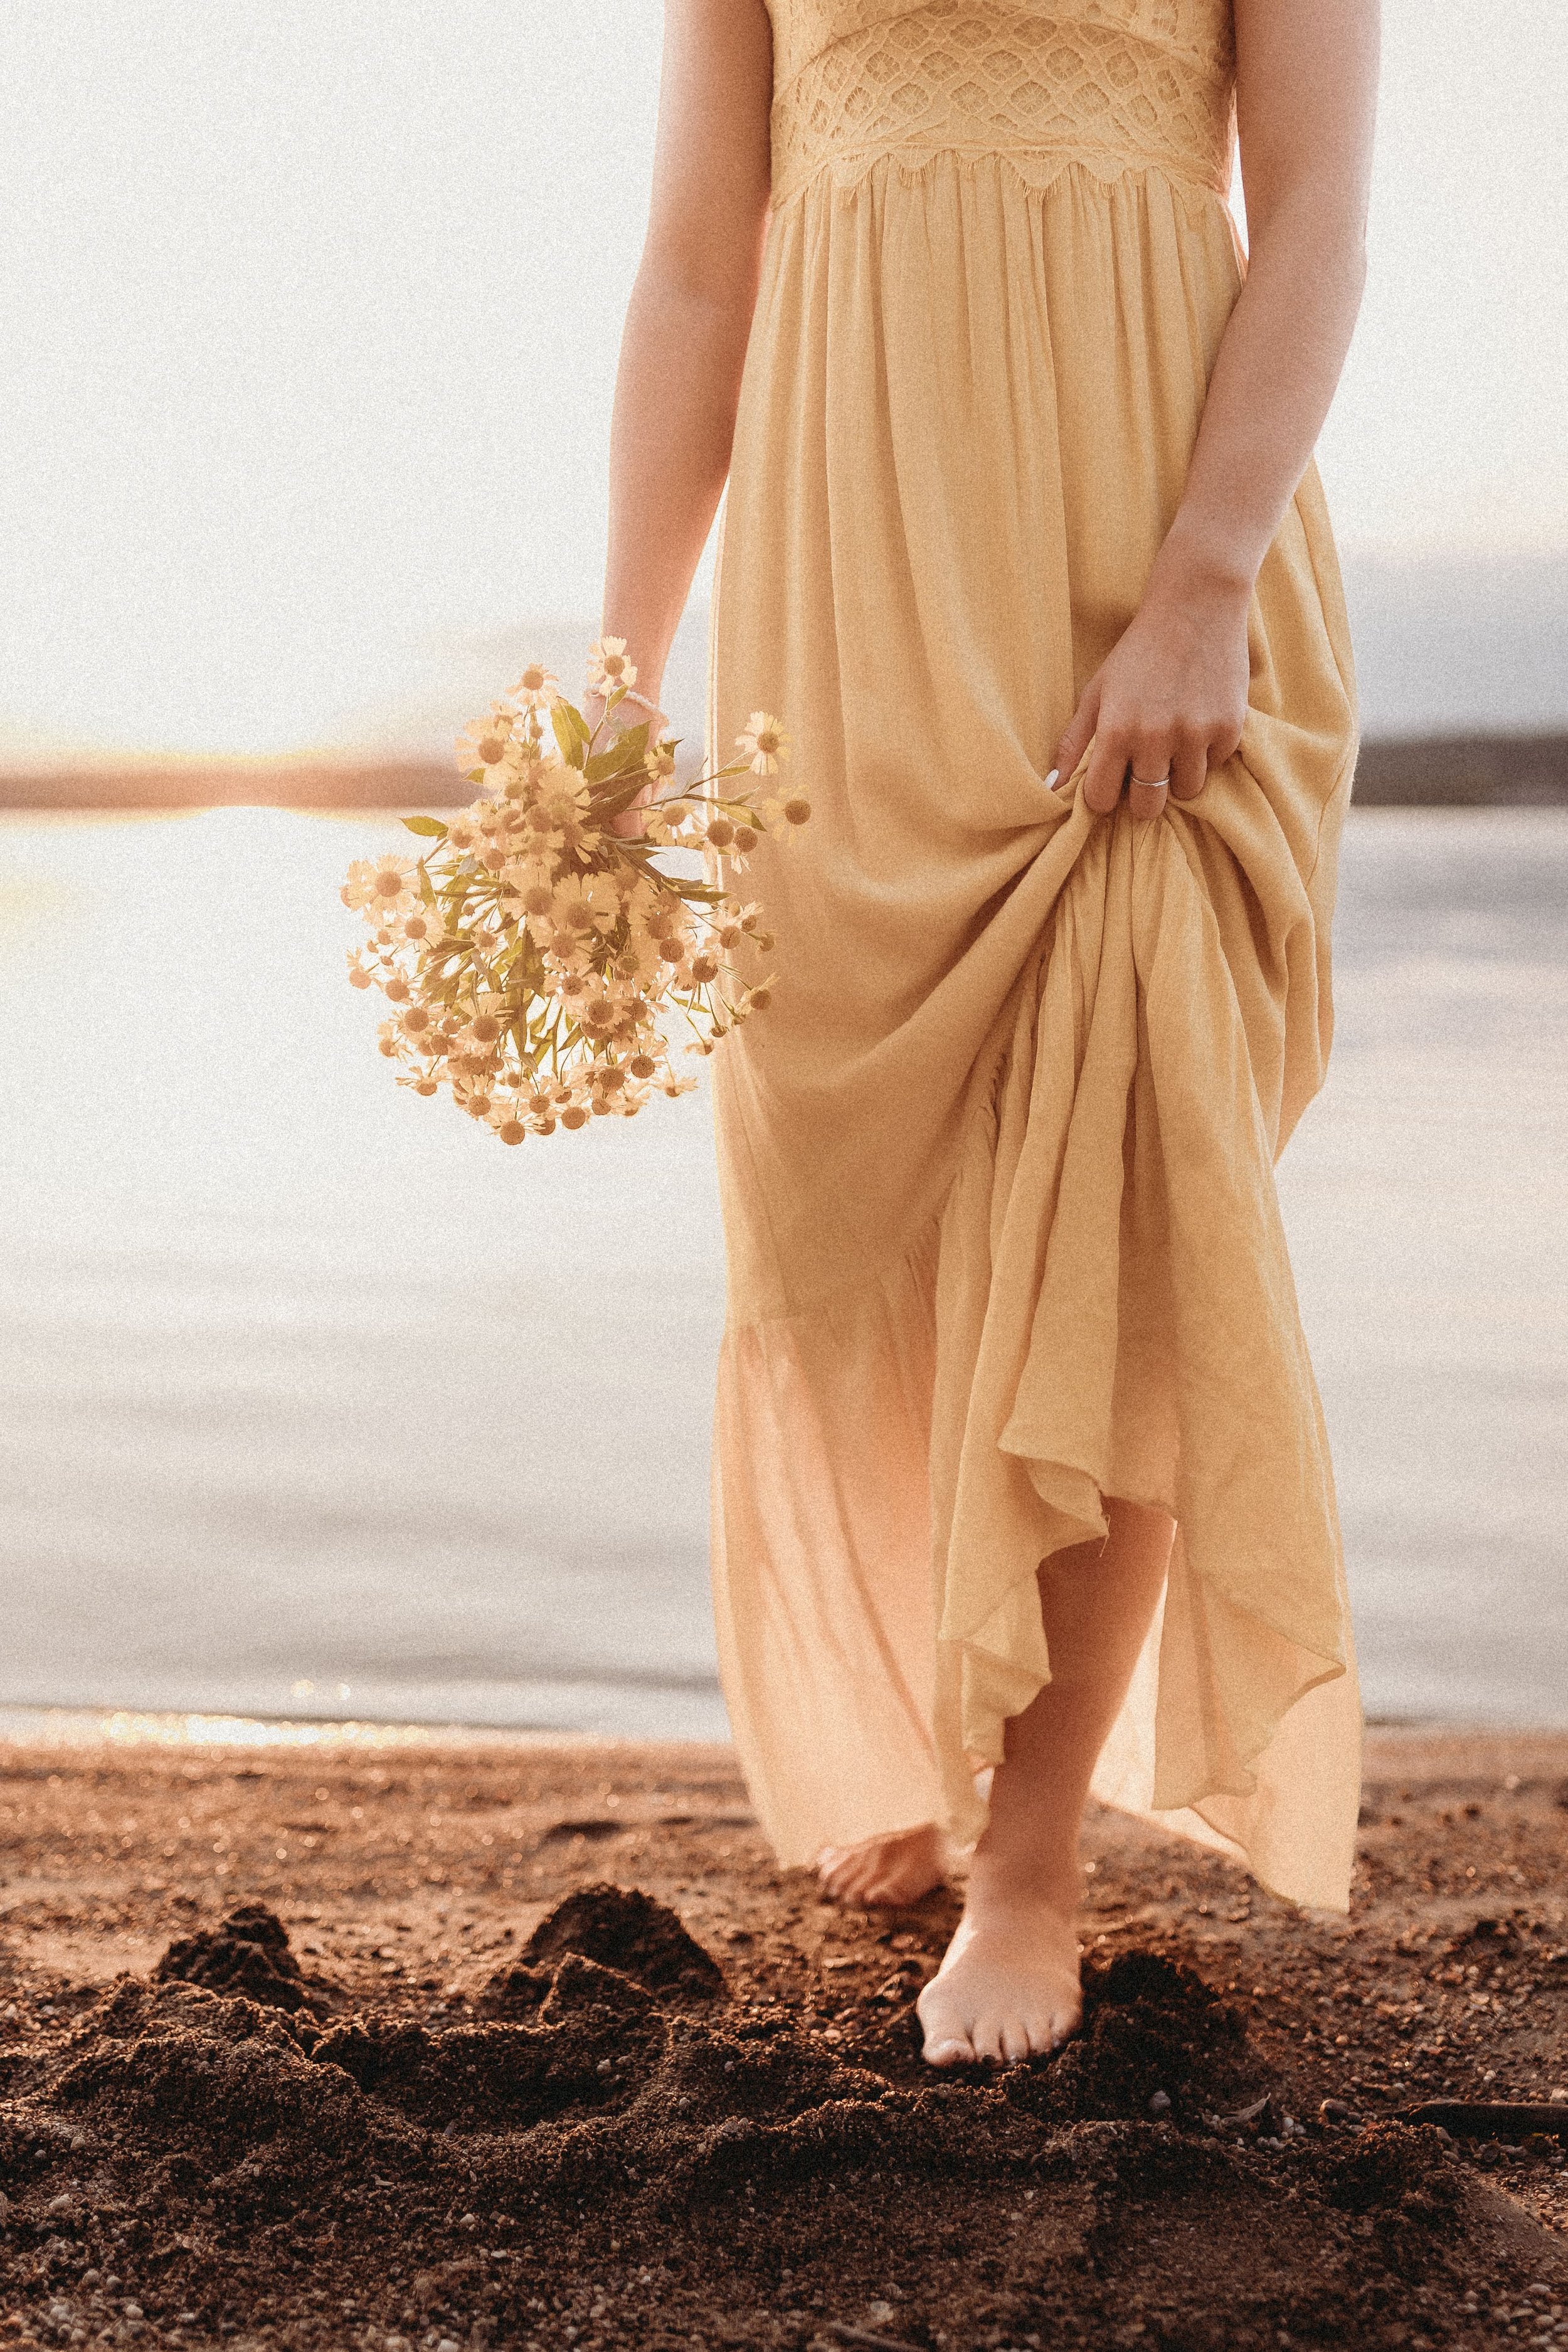  a woman wearing a long yellow dress stands barefoot on the banks of the river while holding a bunch of yellow flowers 